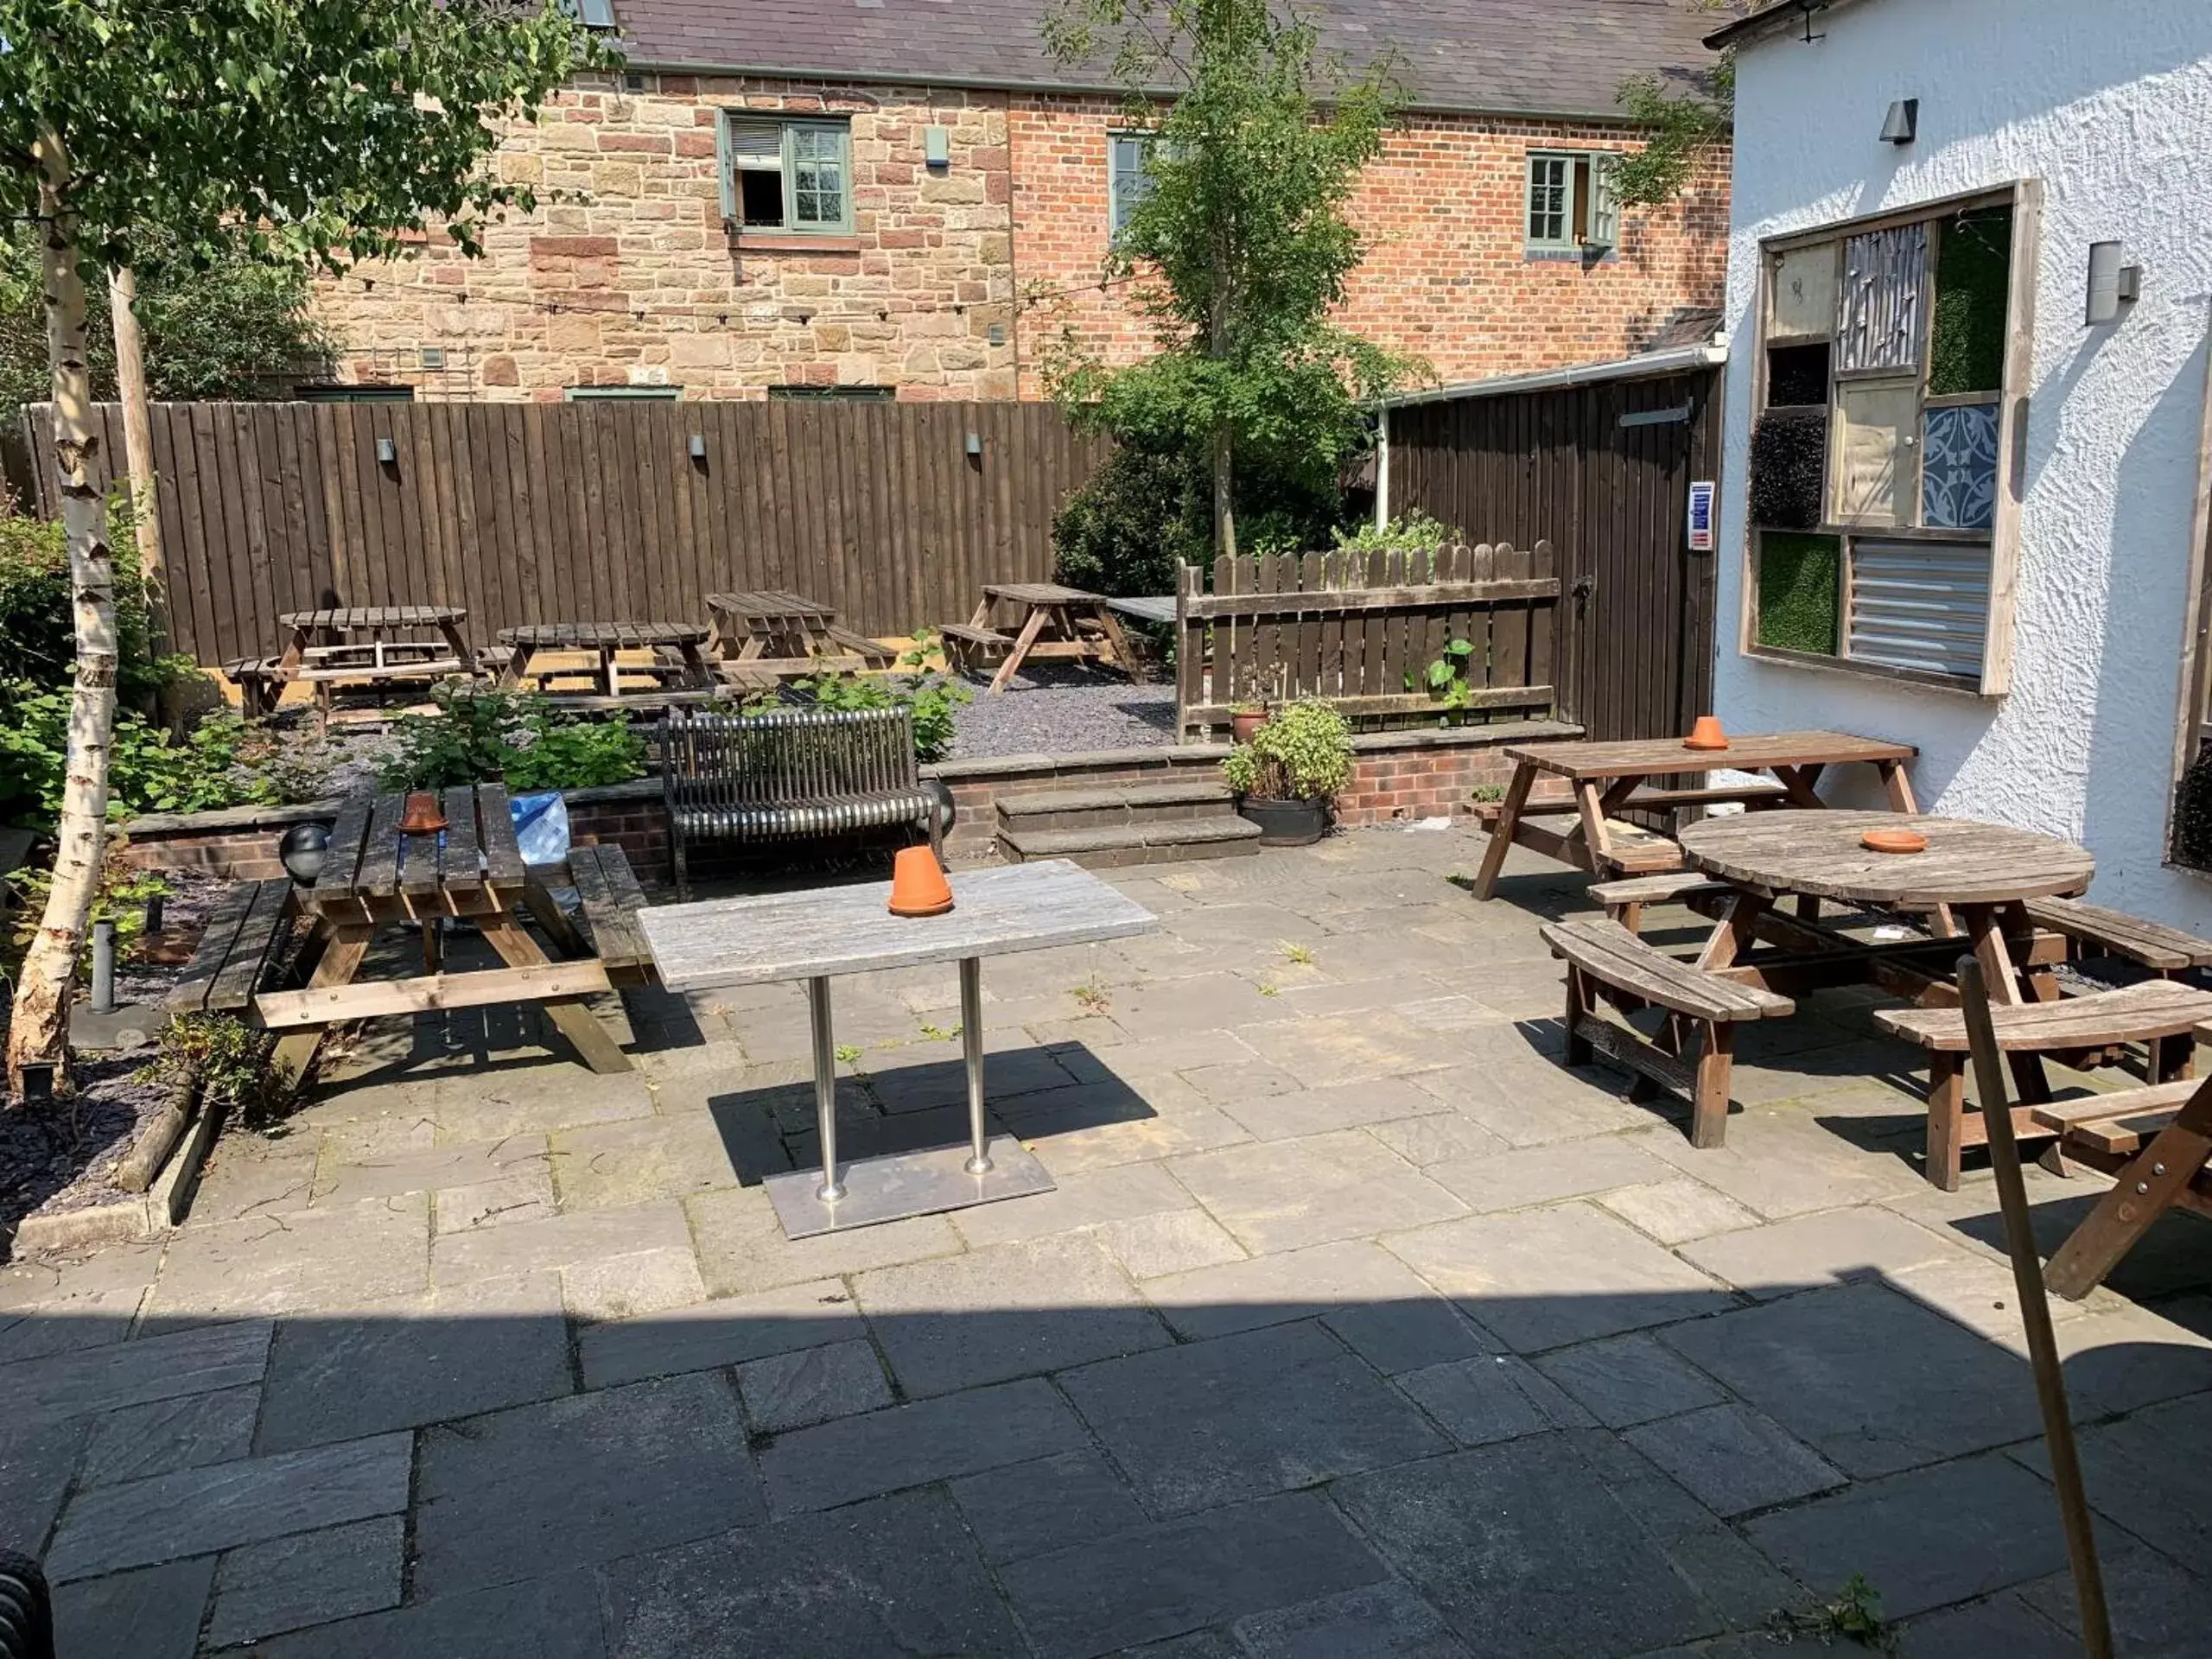 Garden in George and Dragon